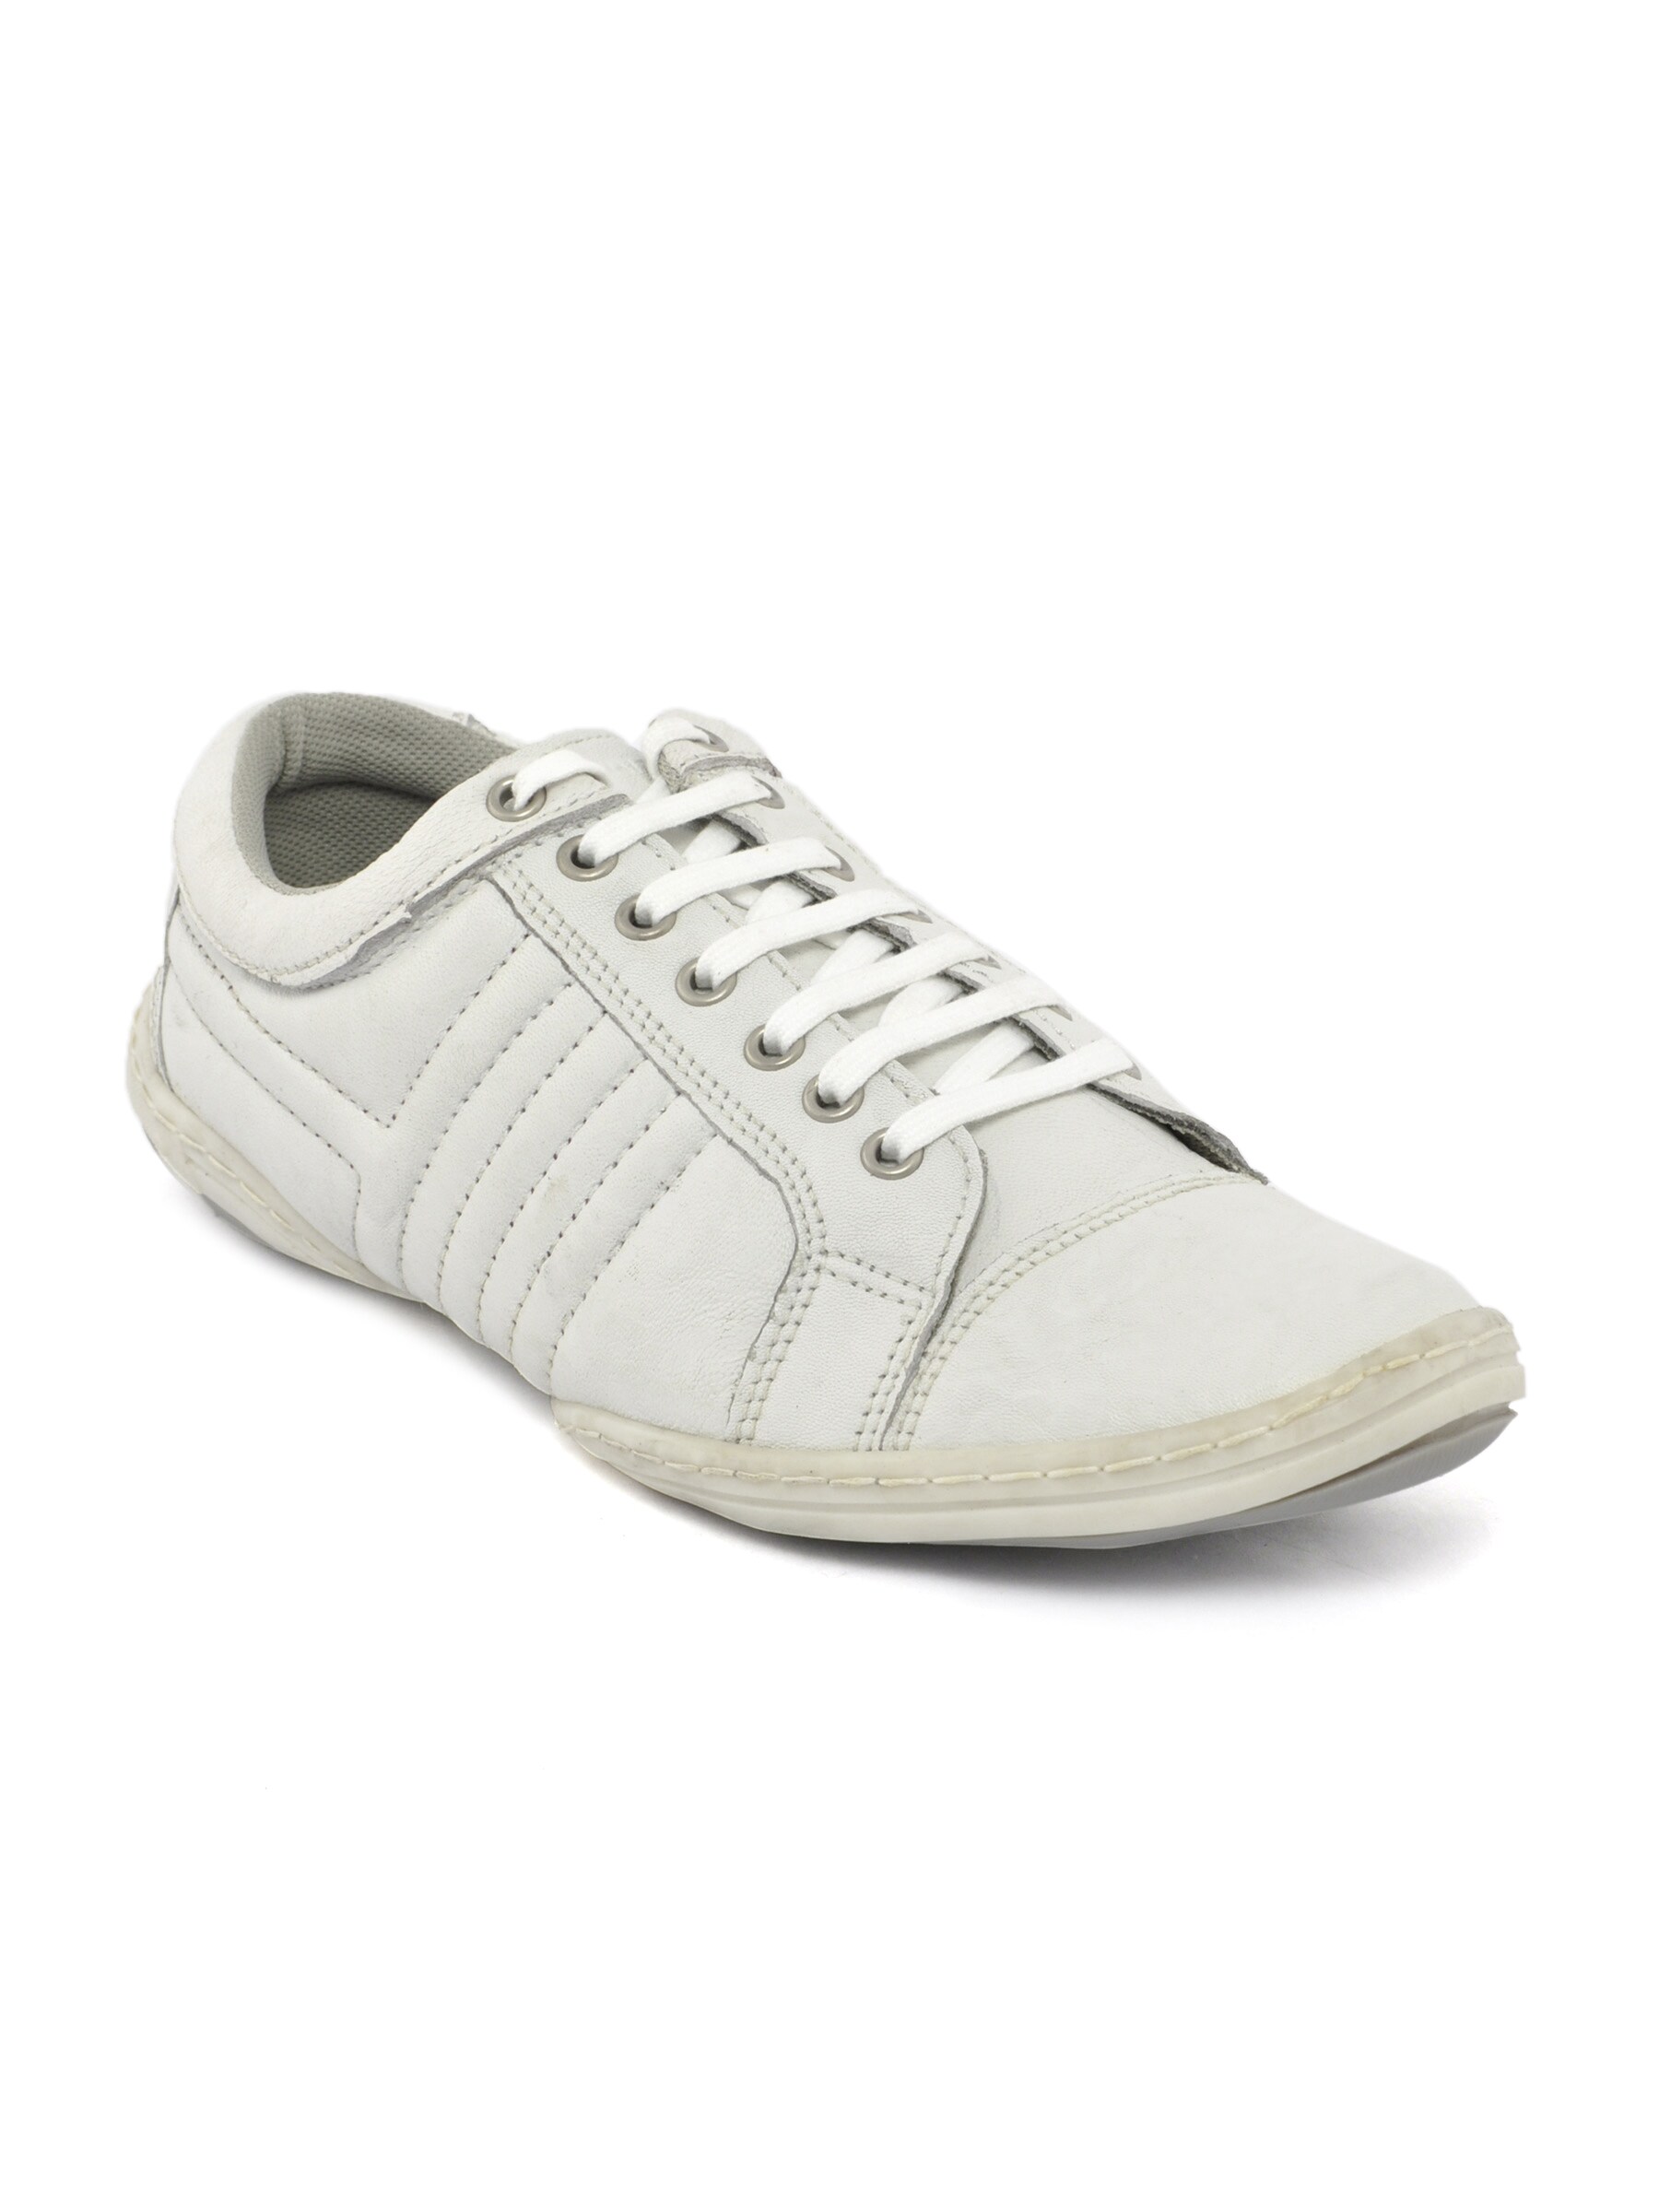 Red Tape Men Casual White Shoes